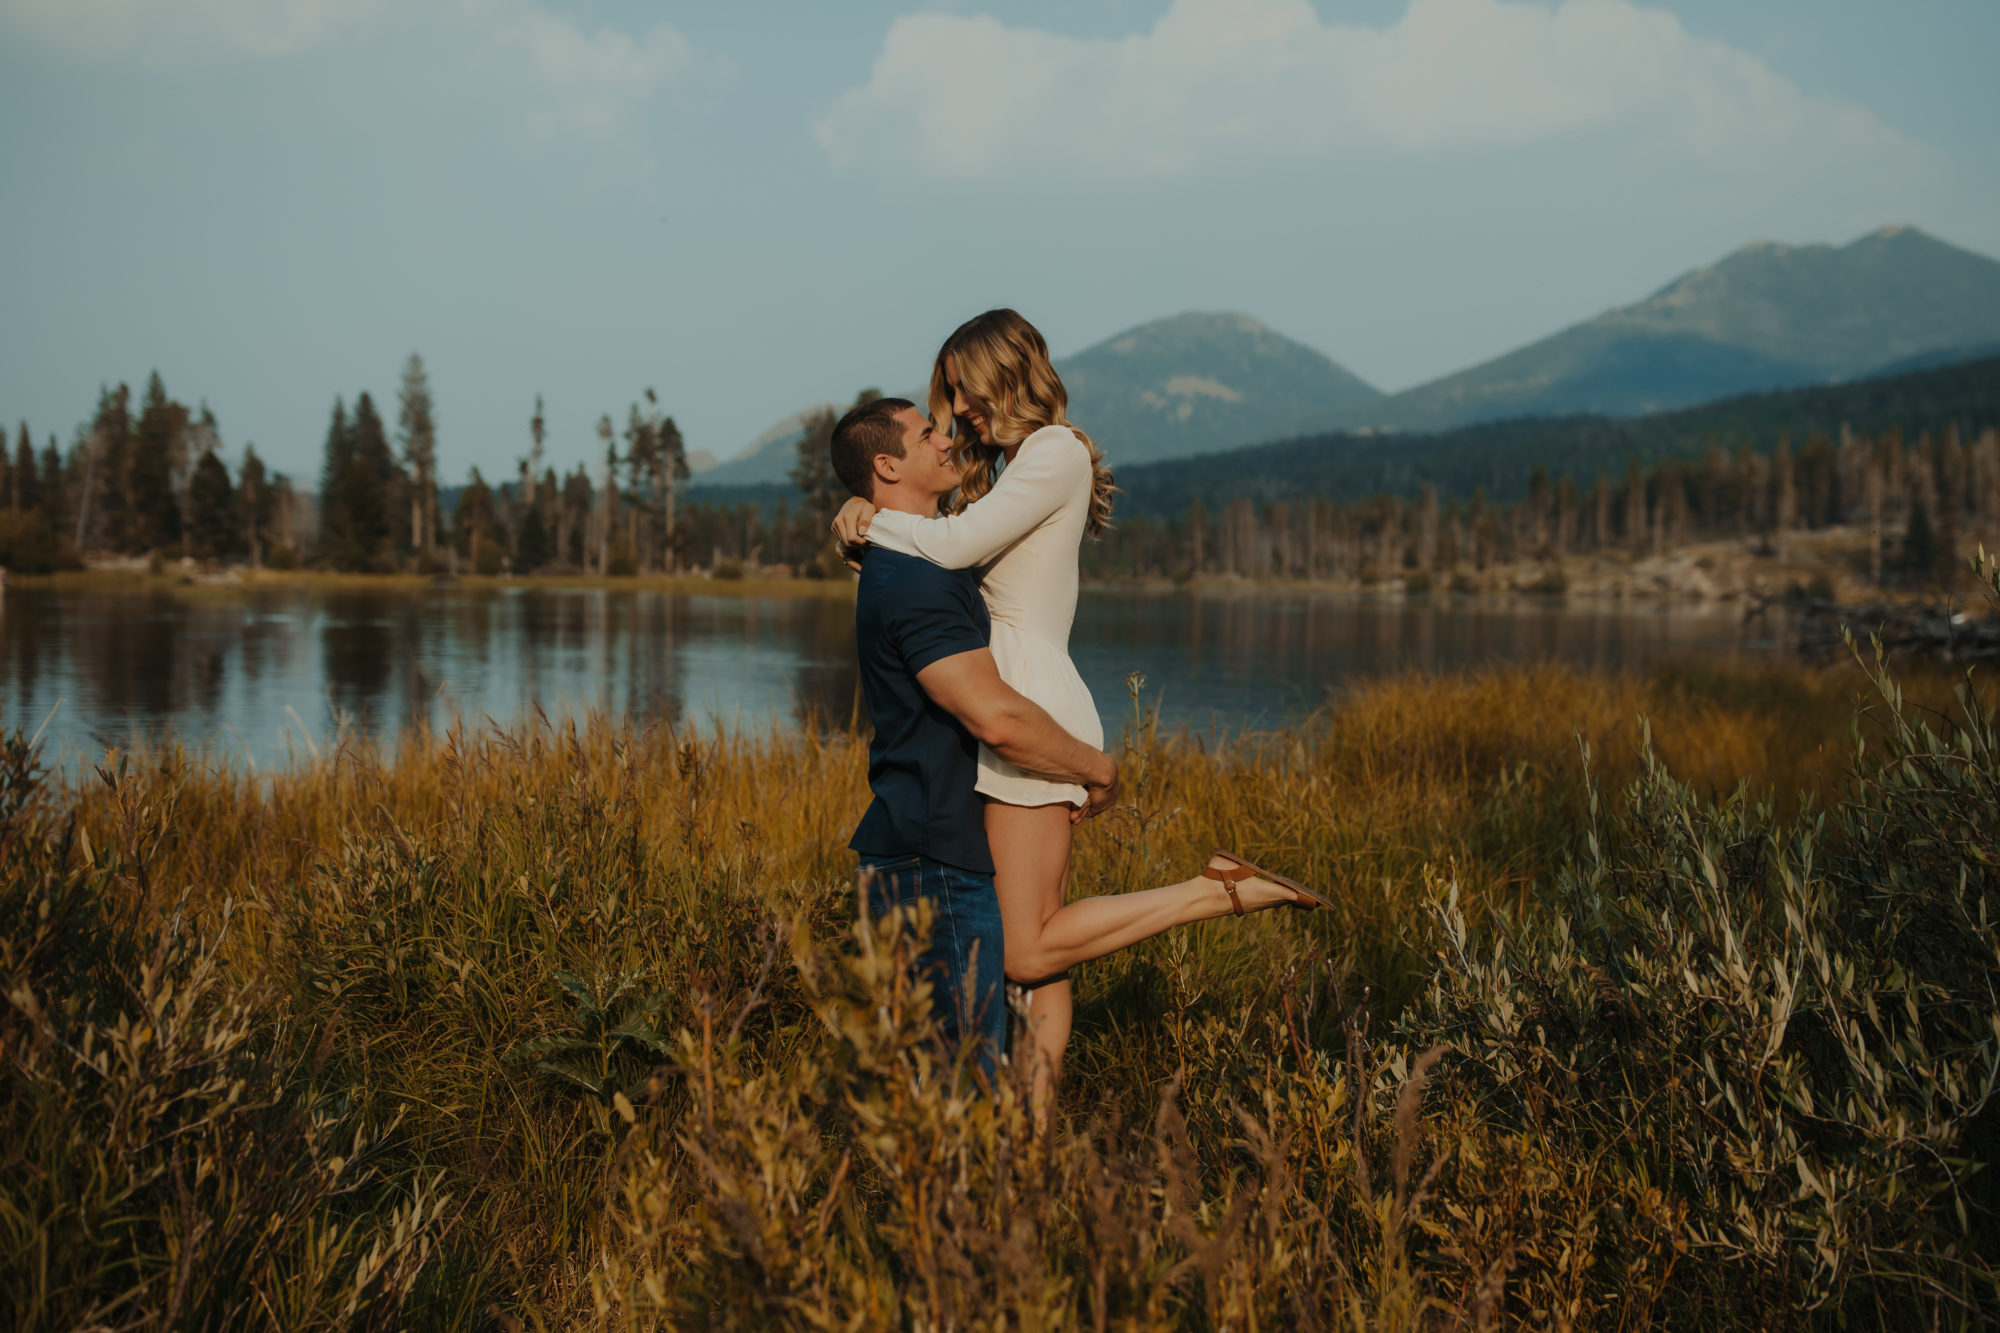 fiance picking his girlfriend up in a meadow in the PNW with the mountains in the background